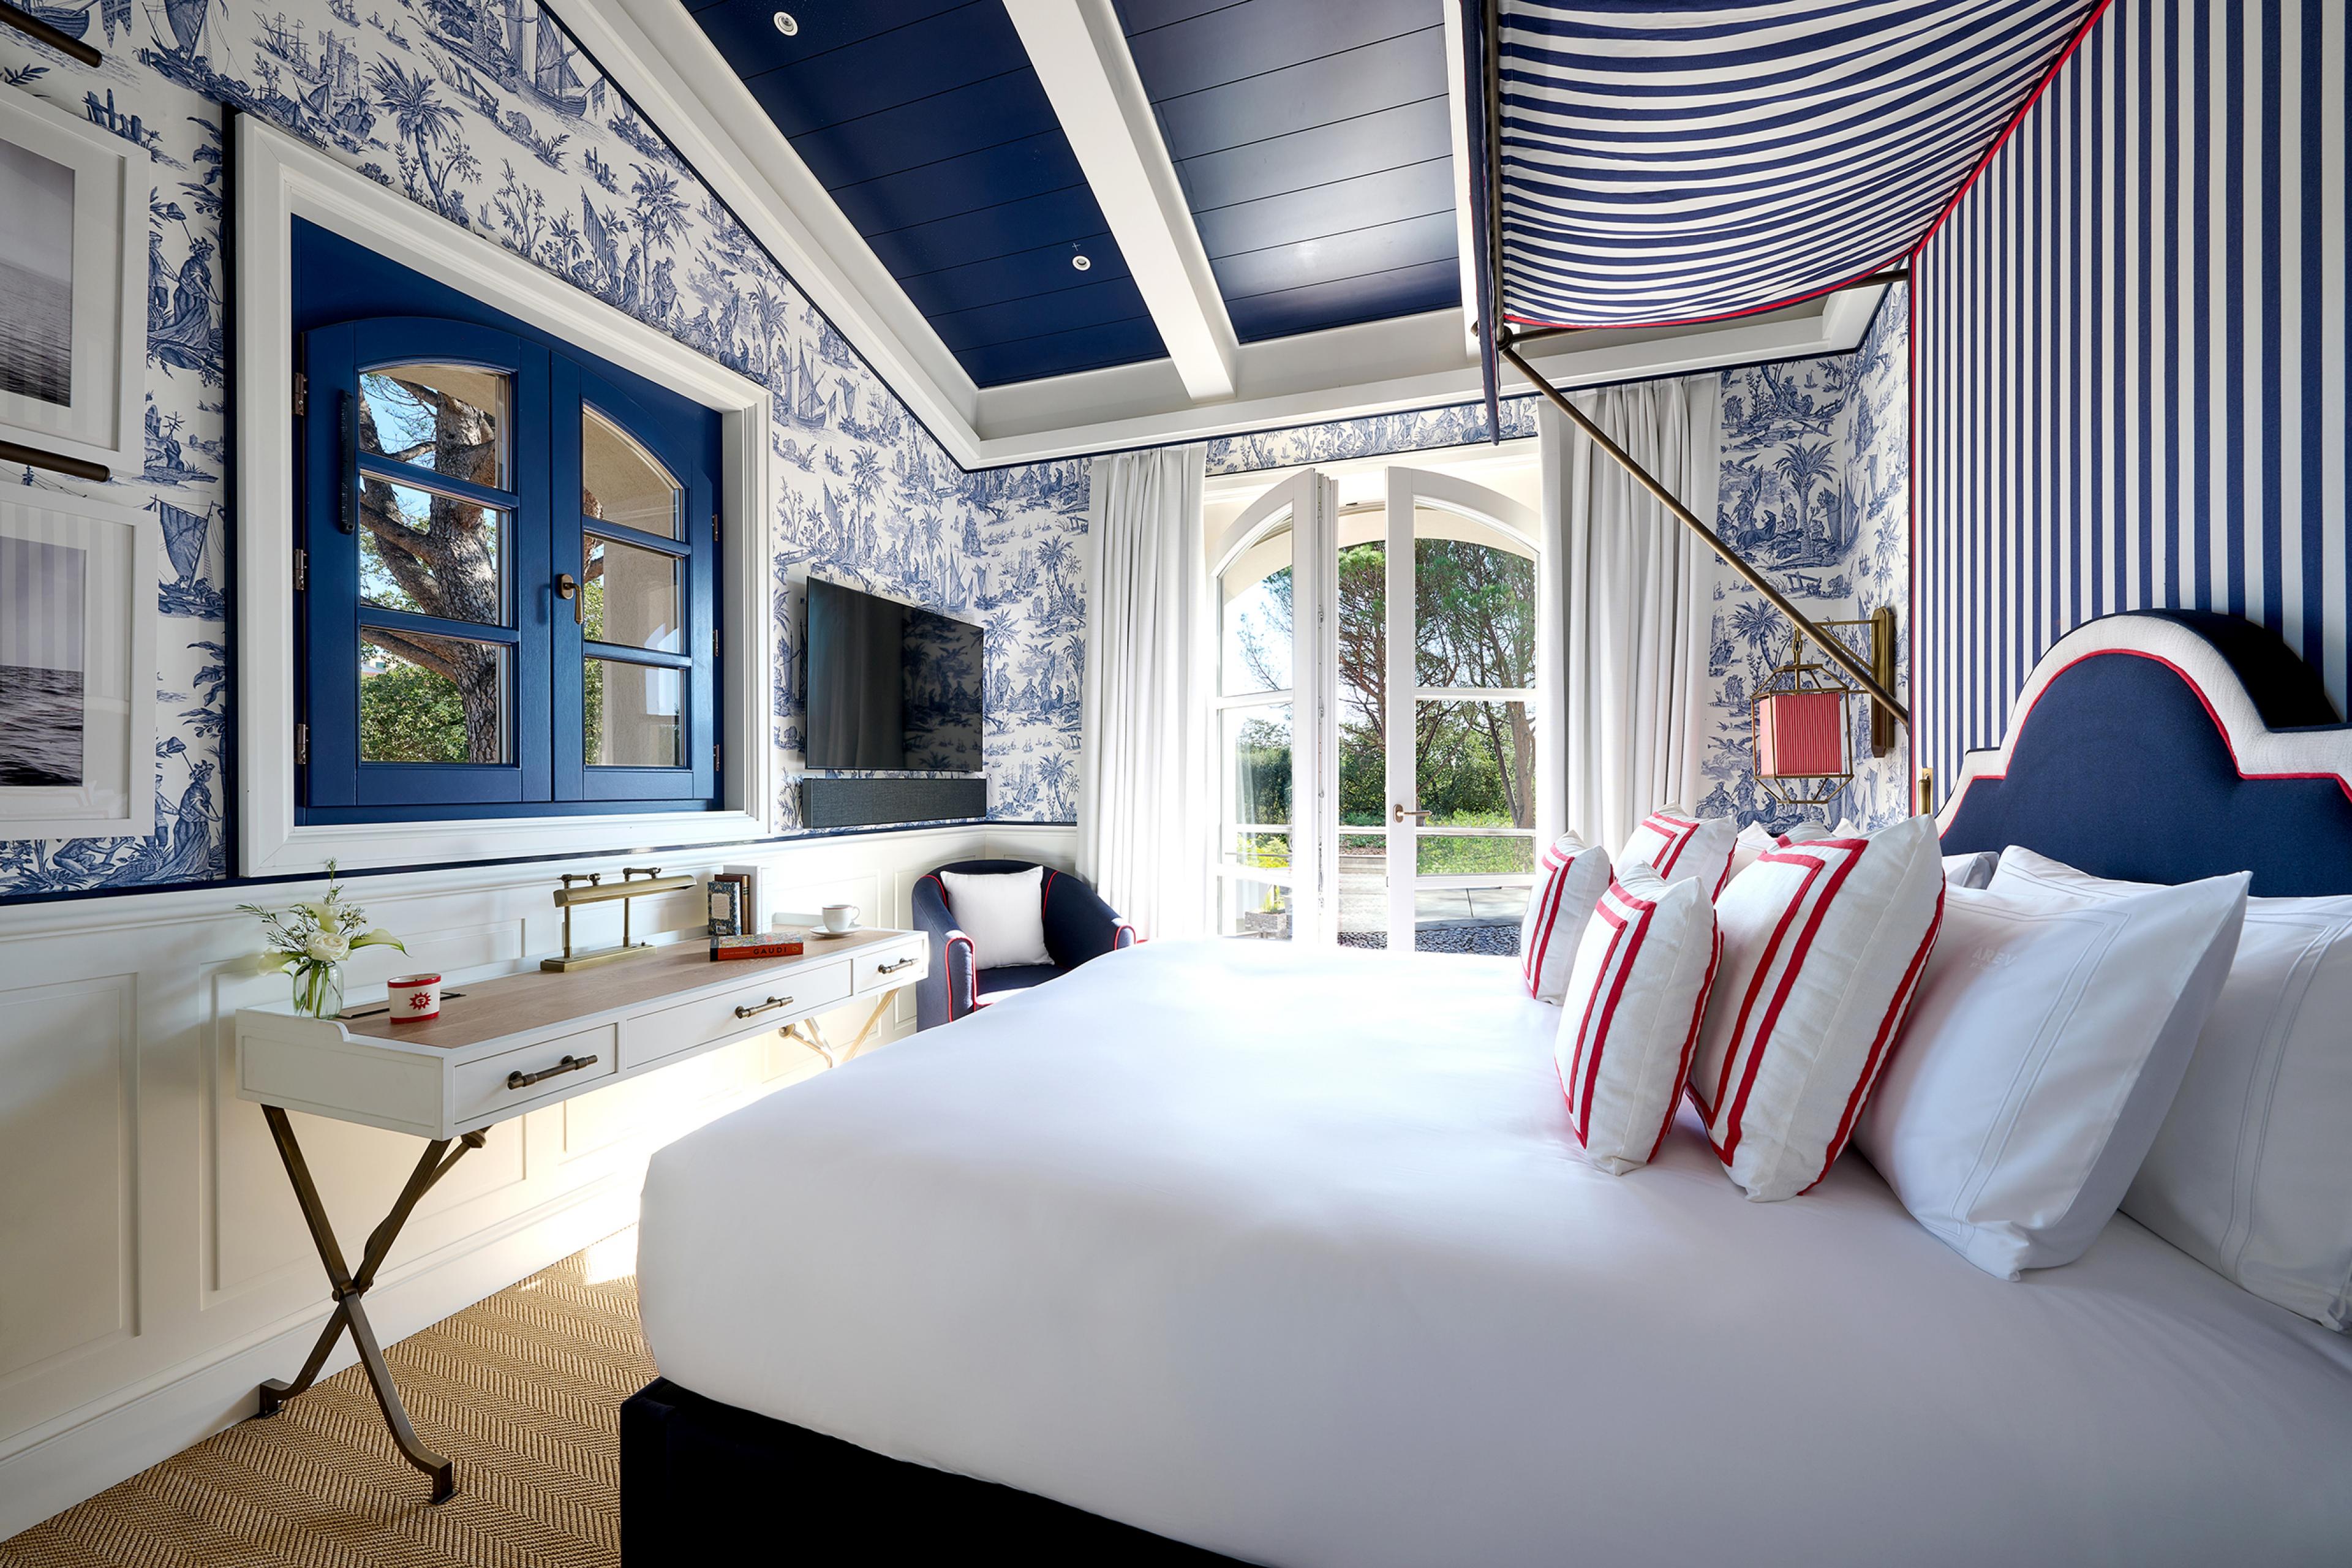 hotel room with blue and white striped walls and ceiling and red accents in decoration 